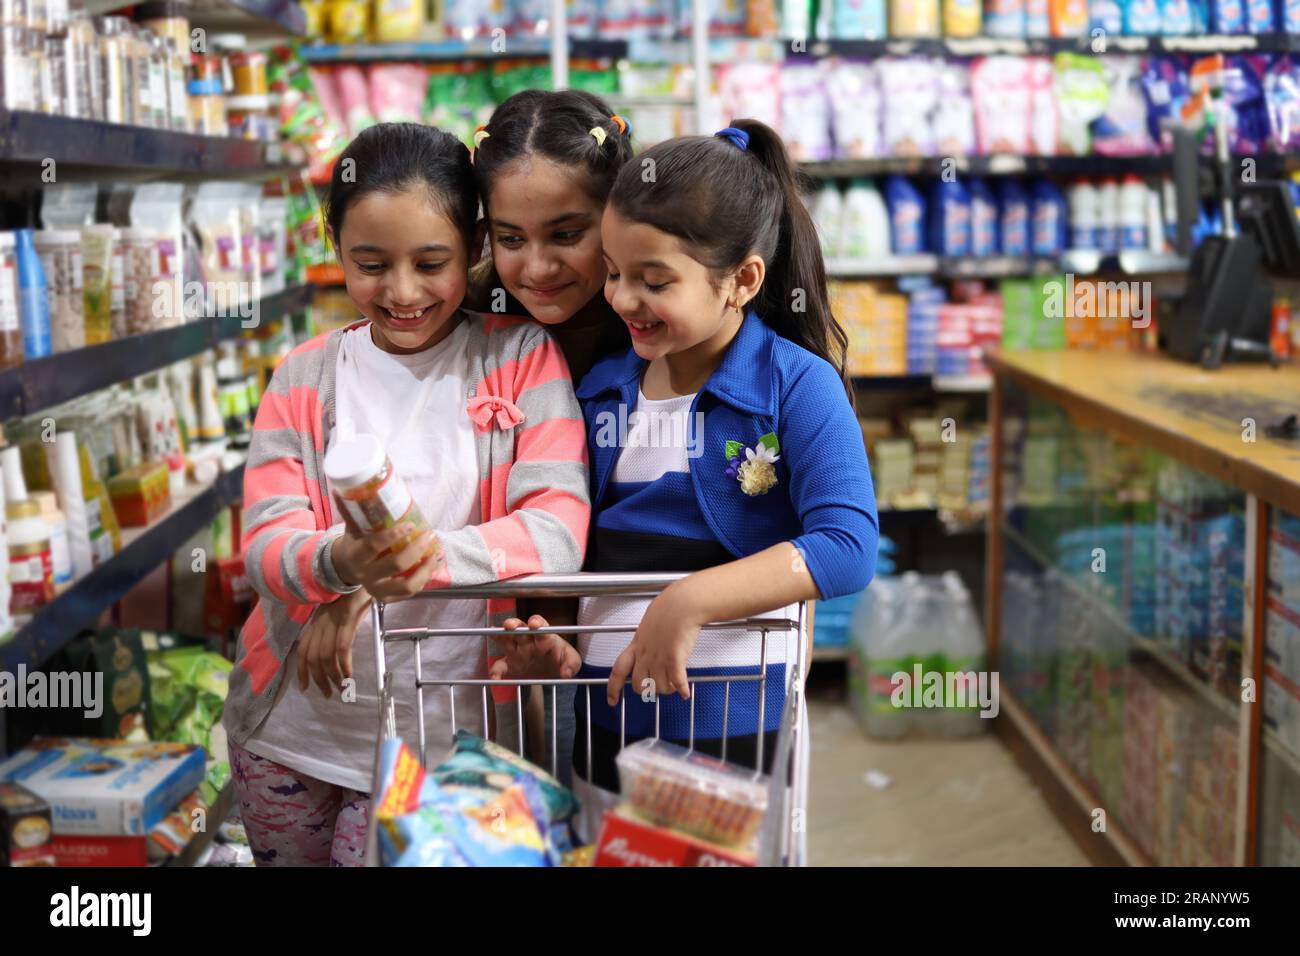 Girls children enjoying purchasing in grocery store. Buying grocery for home in supermarket. Joyful Kids buying eatables as per their choice. Stock Photo